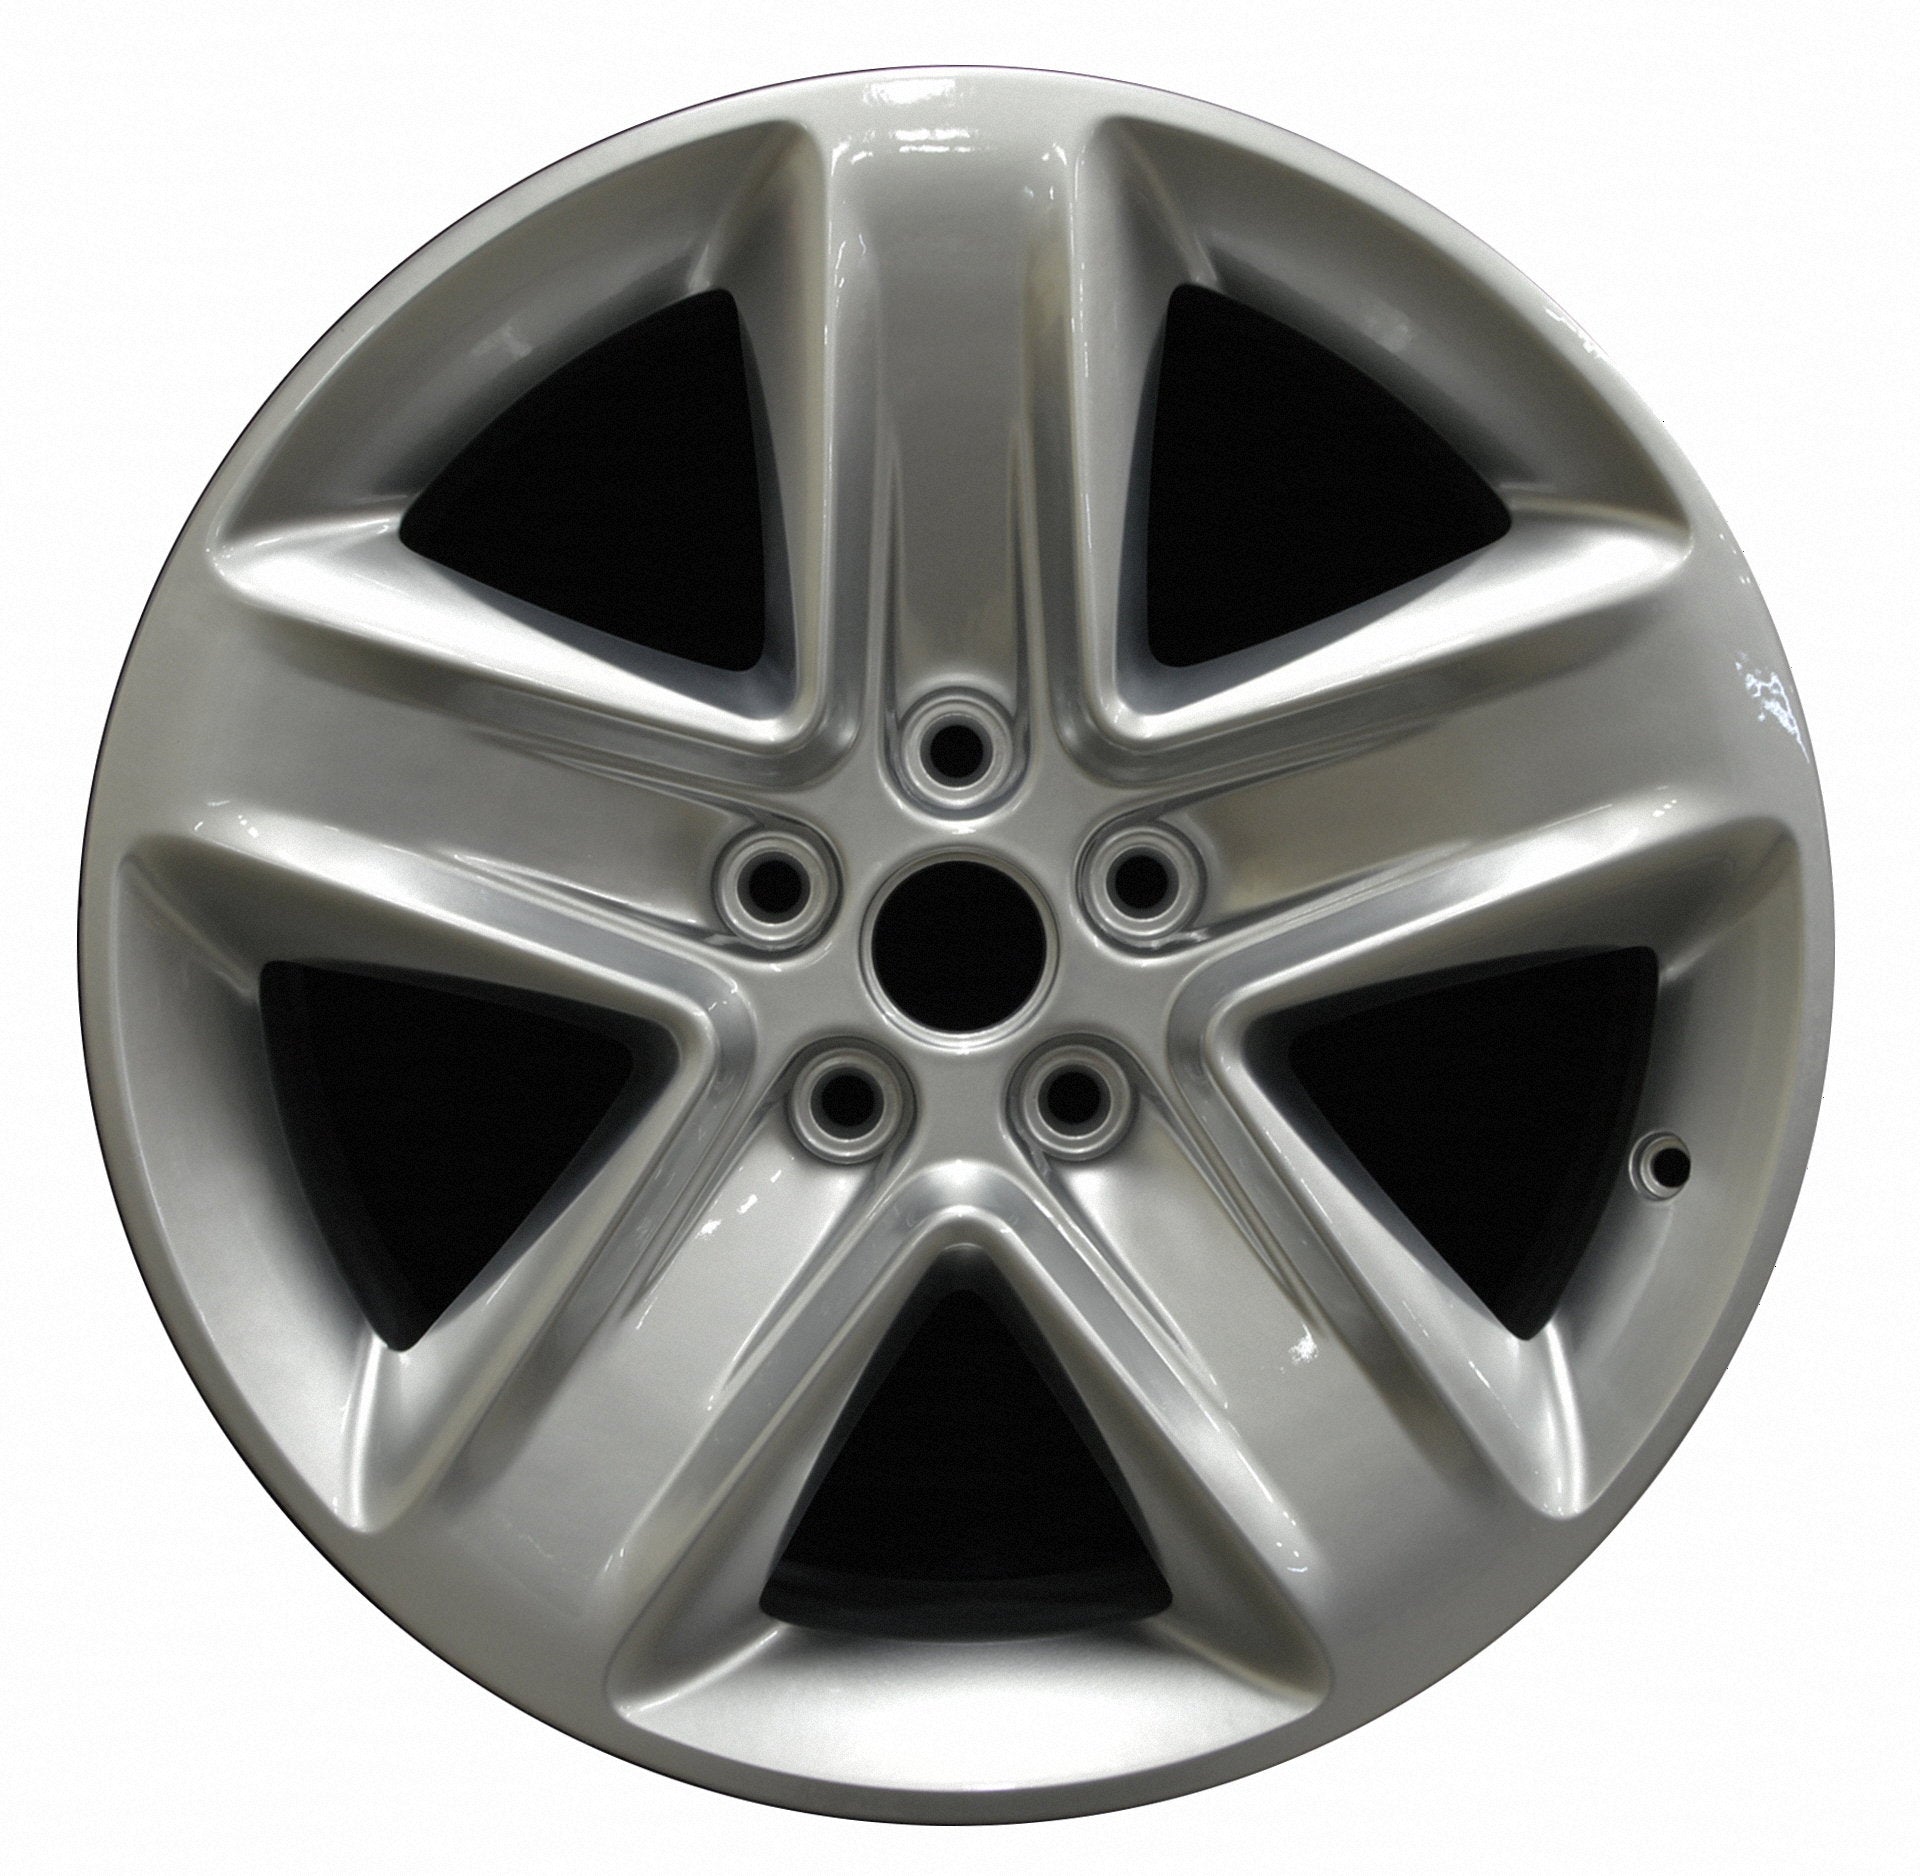 Ford Fusion  2010, 2011, 2012 Factory OEM Car Wheel Size 18x7.5 Alloy WAO.3800.LS100V1.FF